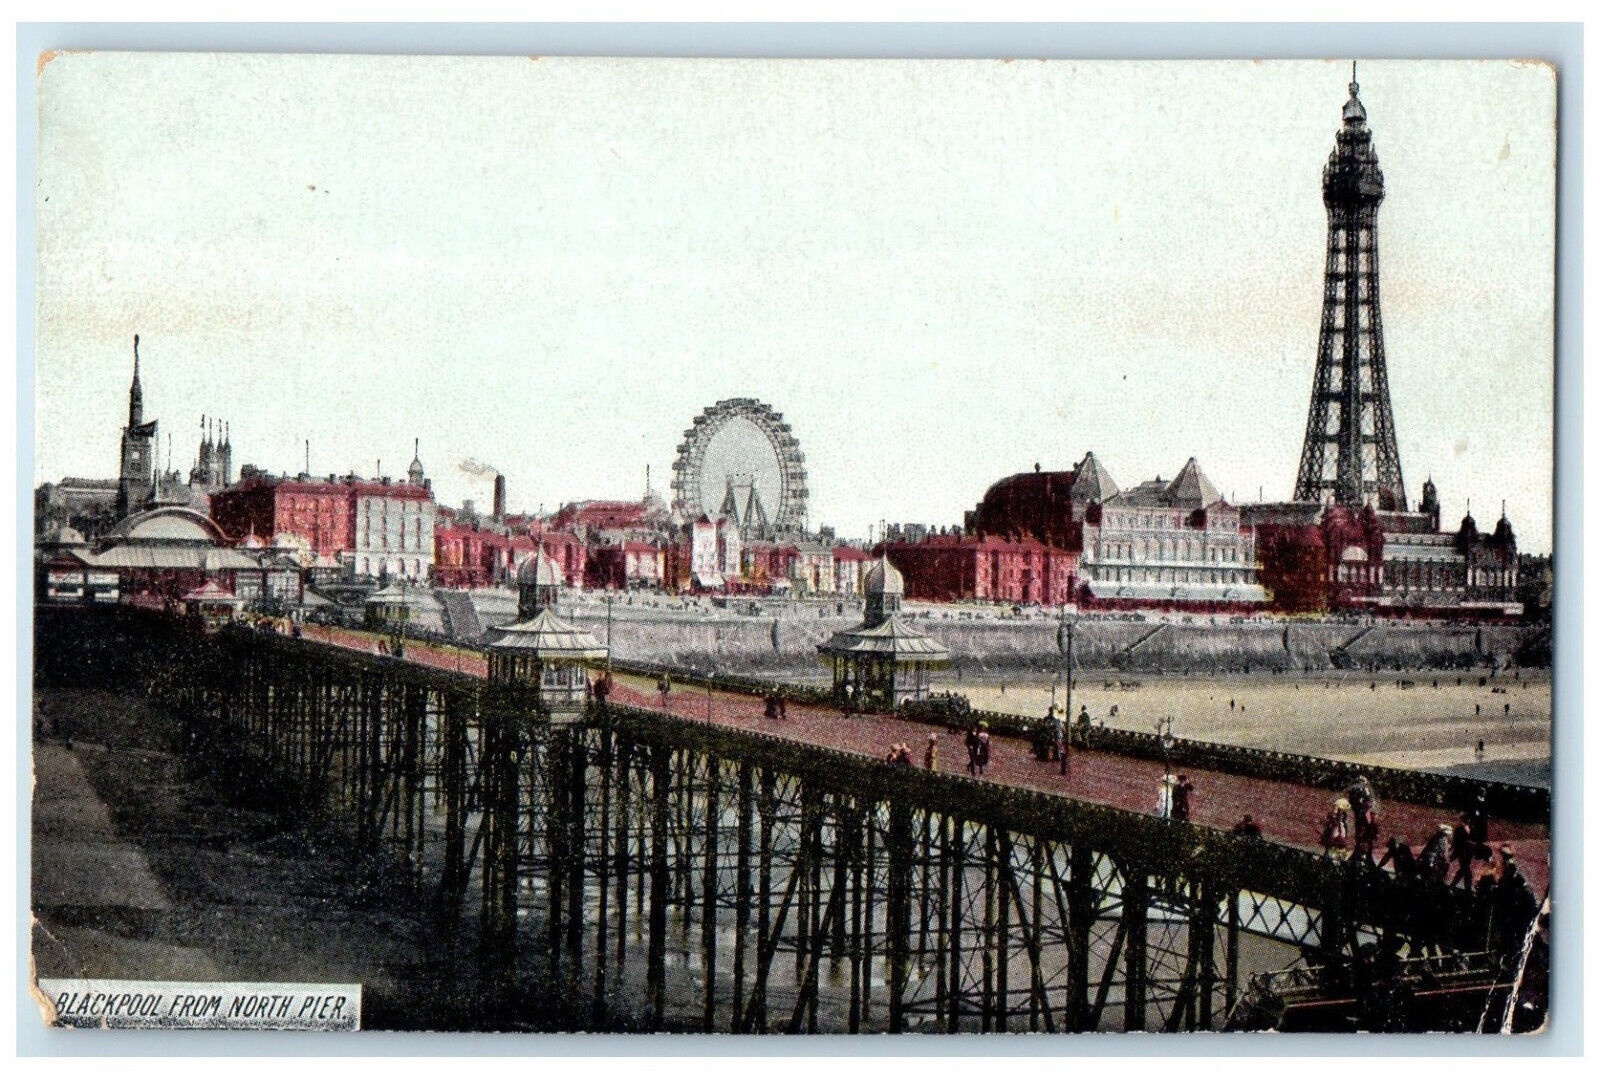 c1910 Blackpool from North Pier Lancashire England Antique Posted Postcard